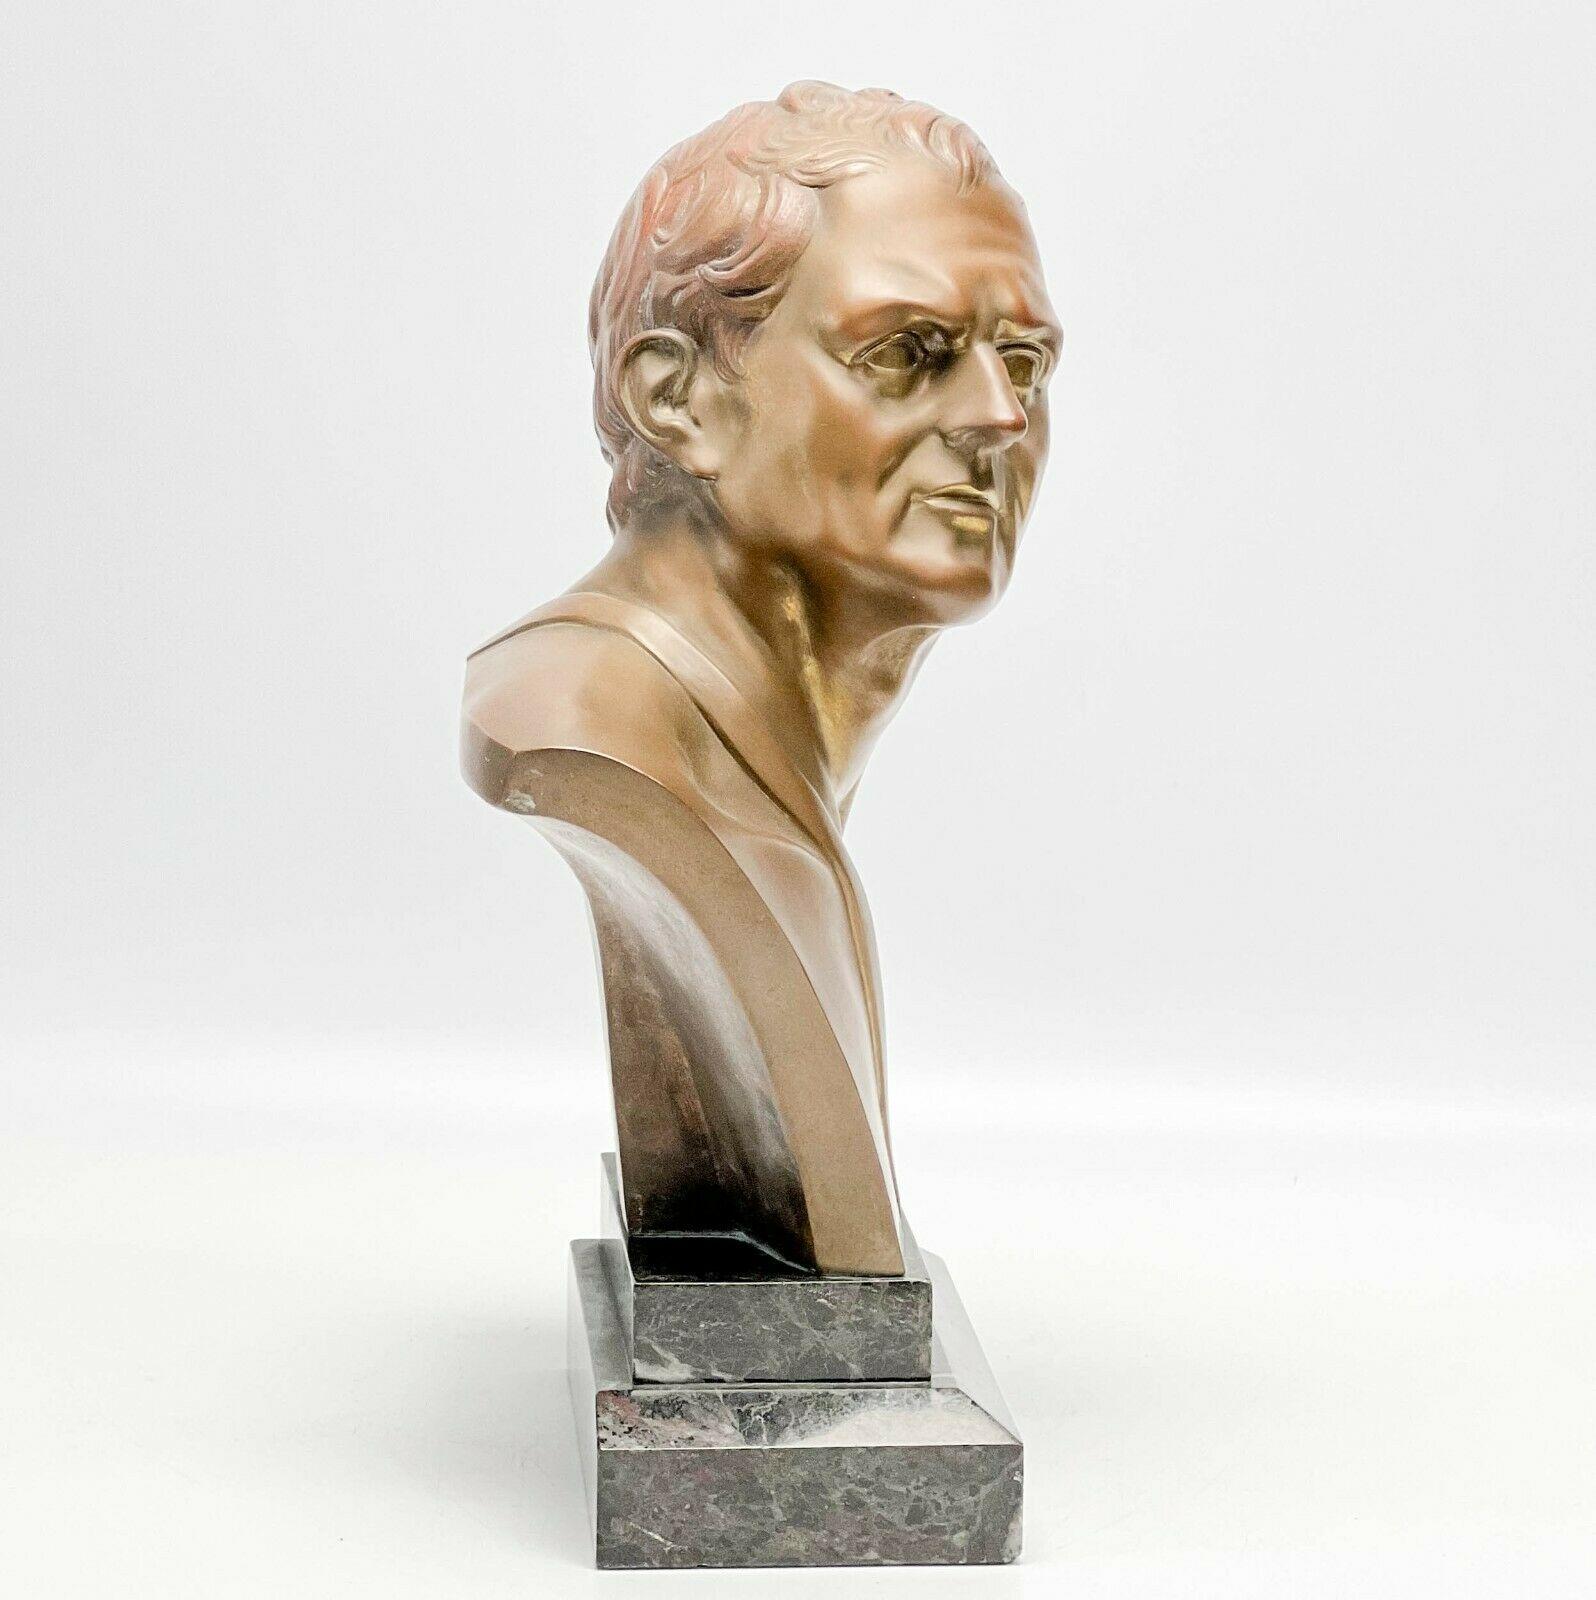 Painted Patinated Bronze Bust of a Man Likely Historical Figure, 19th Century